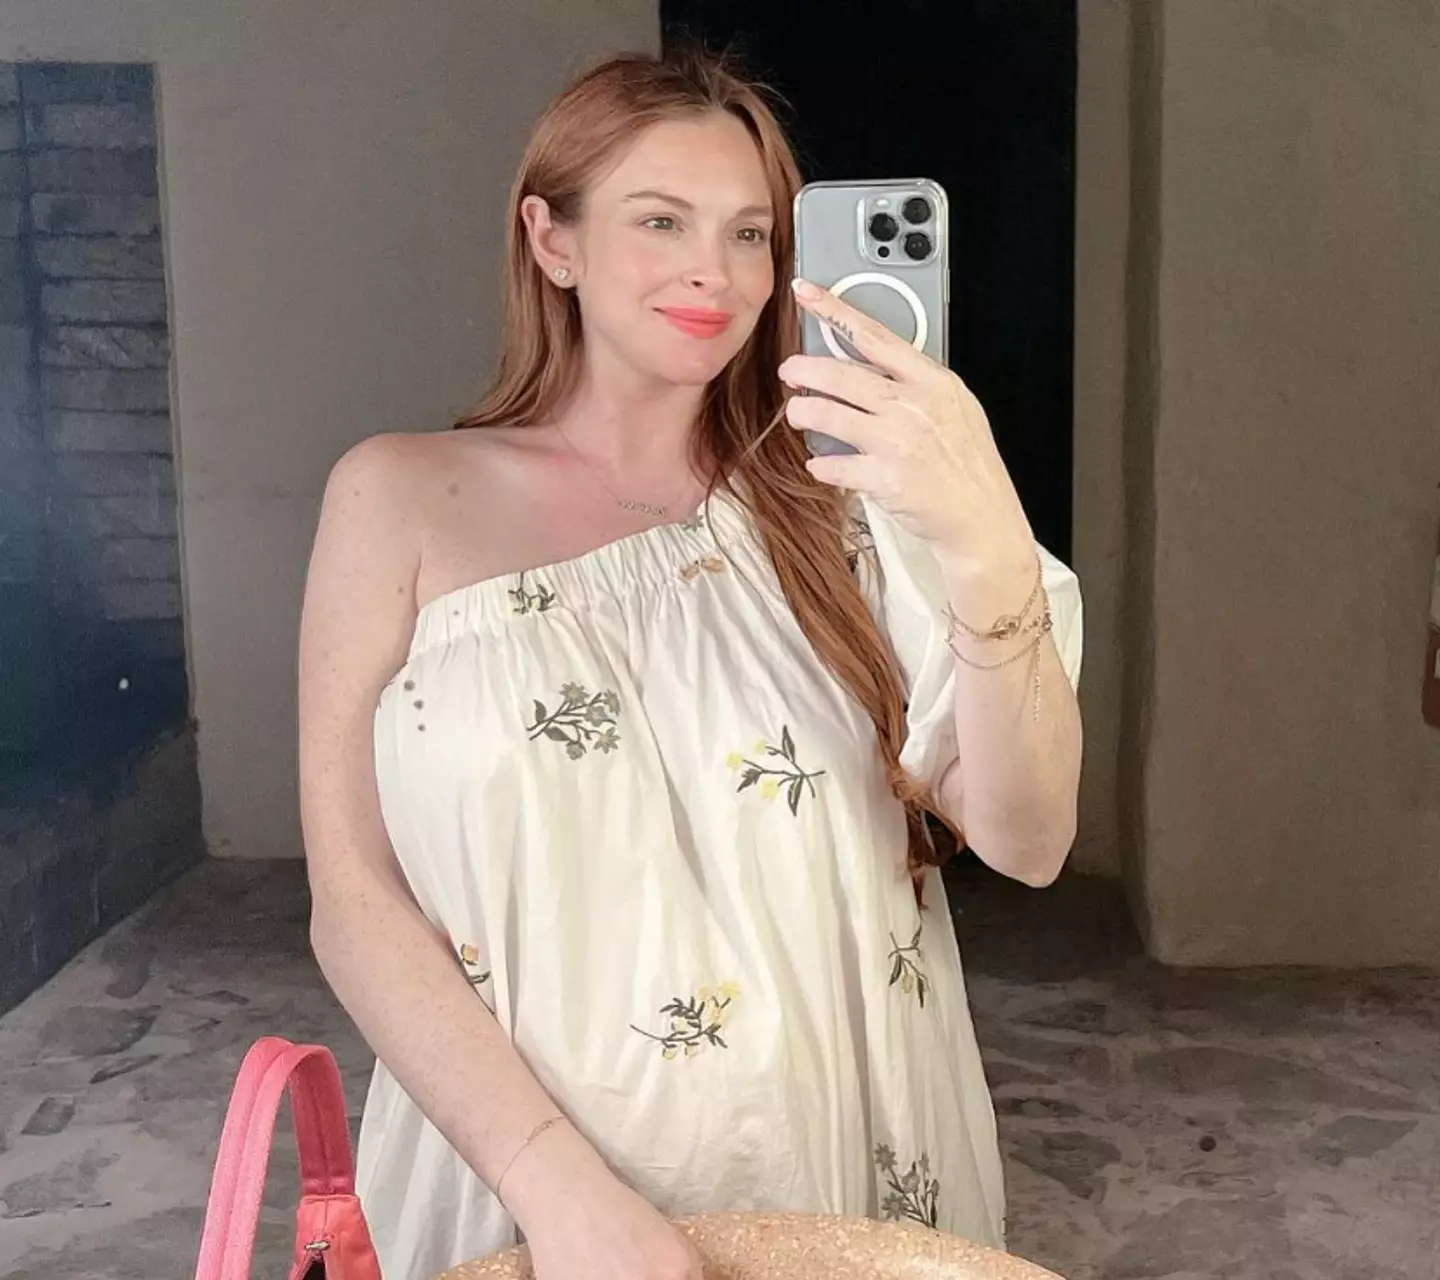 Lindsay Lohan announced her pregnancy in March.